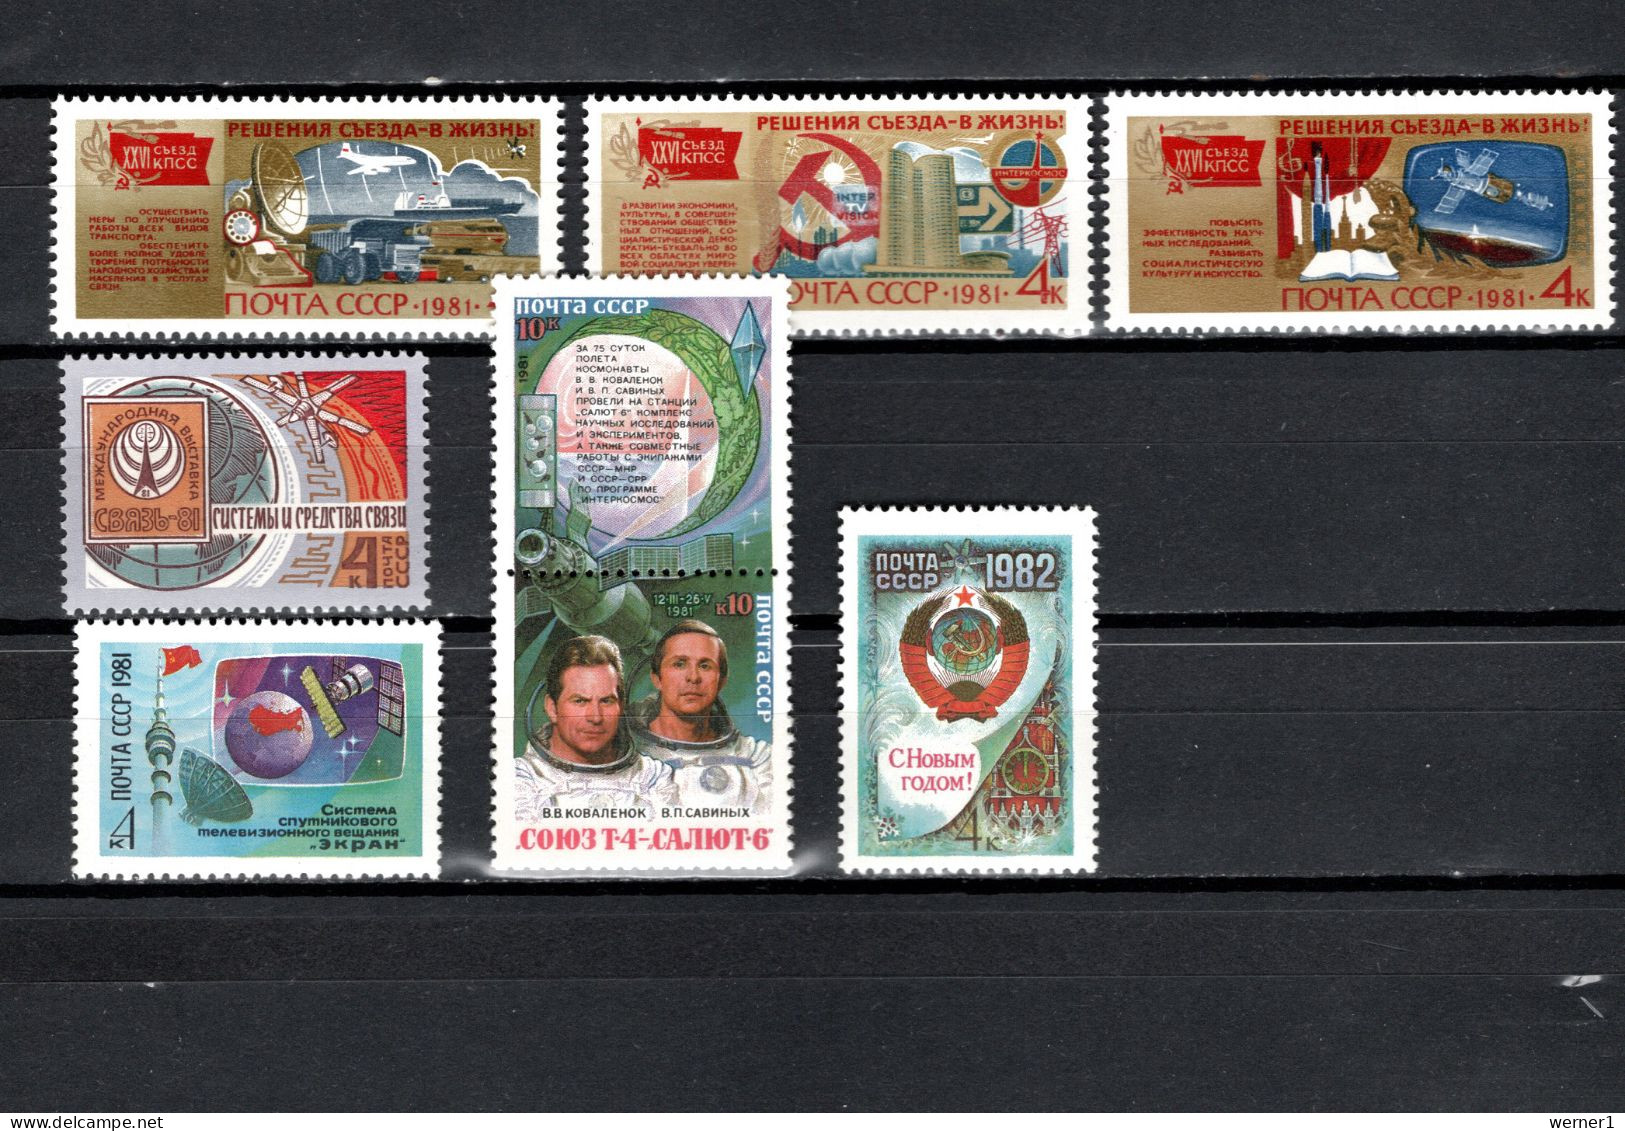 USSR Russia 1981 Space, Communist Party Congress, SWJAS '81, Ekran Satellite, Saljut 6, New Year 8 Stamps MNH - Russia & USSR